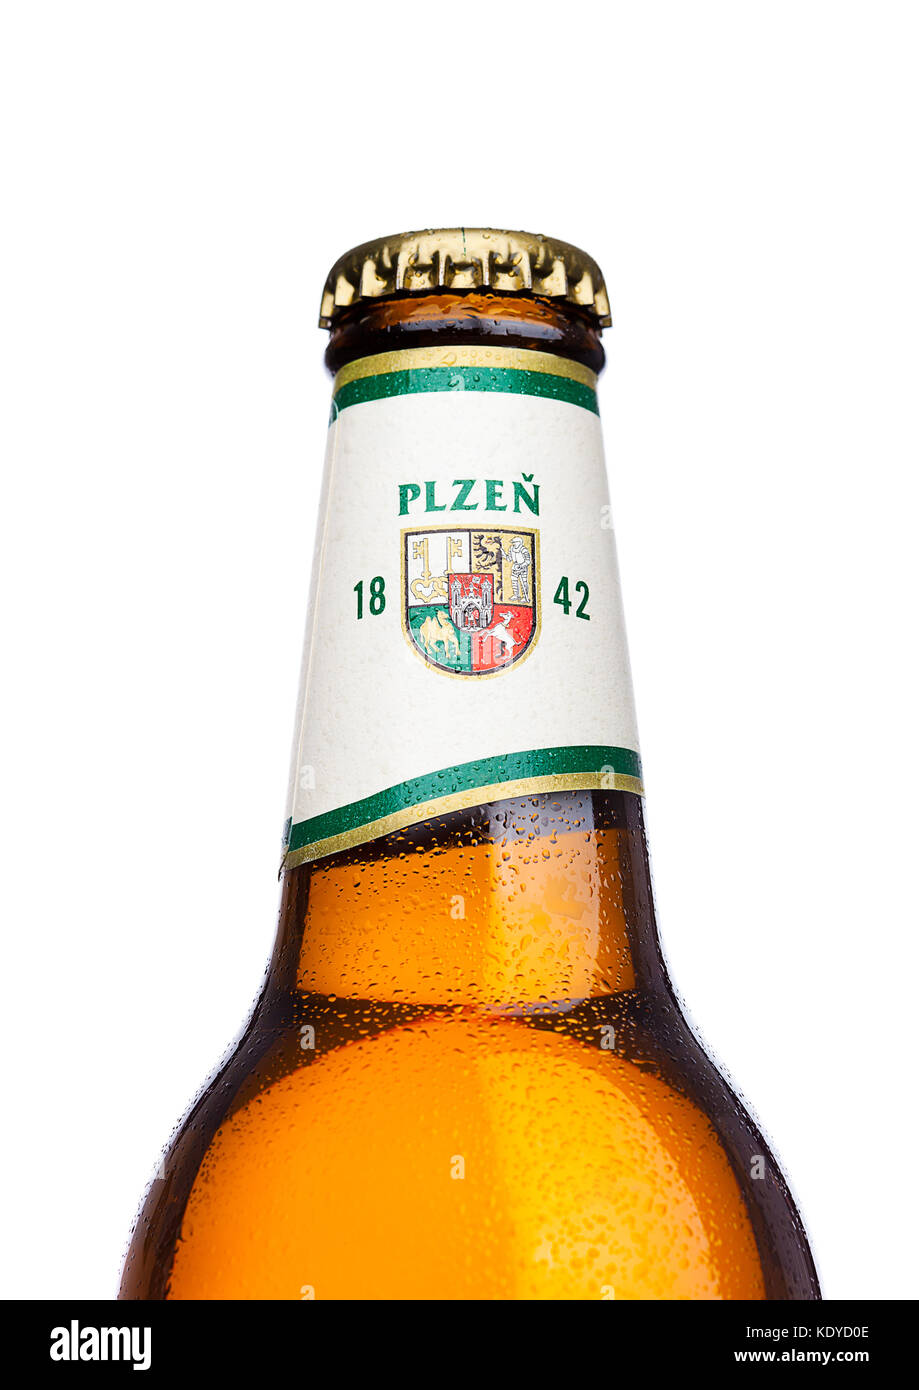 LONDON,UK - MARCH 21, 2017 :  Bottle of Pilsner Urquell beer on white background.It has been produced since 1842 in Pilsen, Czech Republic. Stock Photo